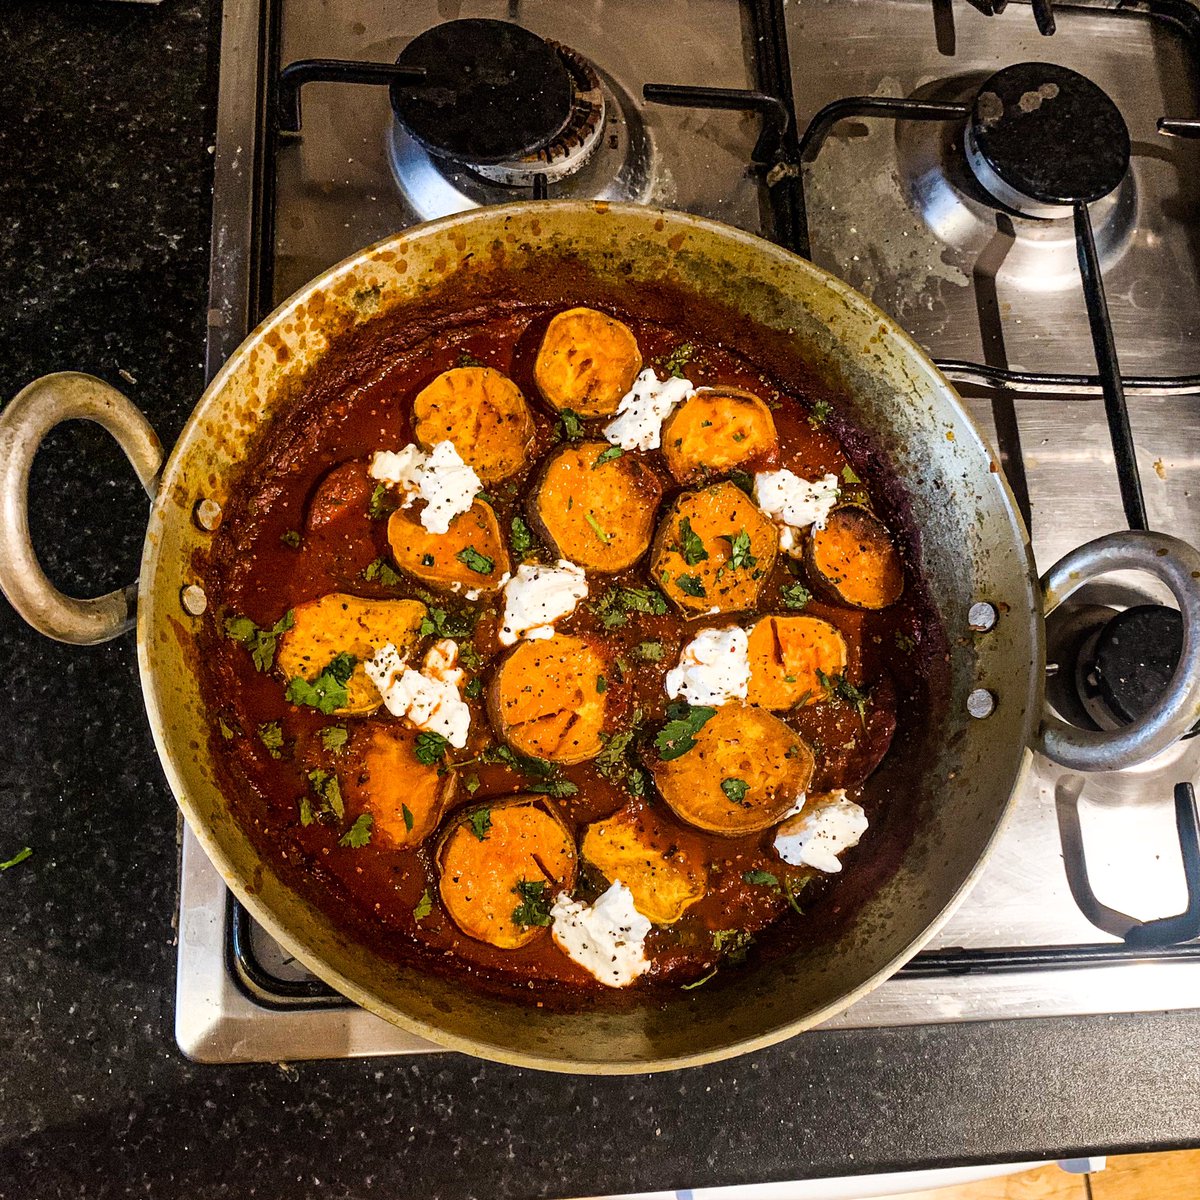 Oh, and tonight's dinner was an  @ottolenghi:Roasted sweet potato, tomato sauce and feta (we swapped in Greek yoghurt for the feta)  https://www.theguardian.com/food/2020/feb/15/yotam-ottolenghi-recipes-for-one-zaatar-salmon-ginger-fried-rice-sweet-potato-feta